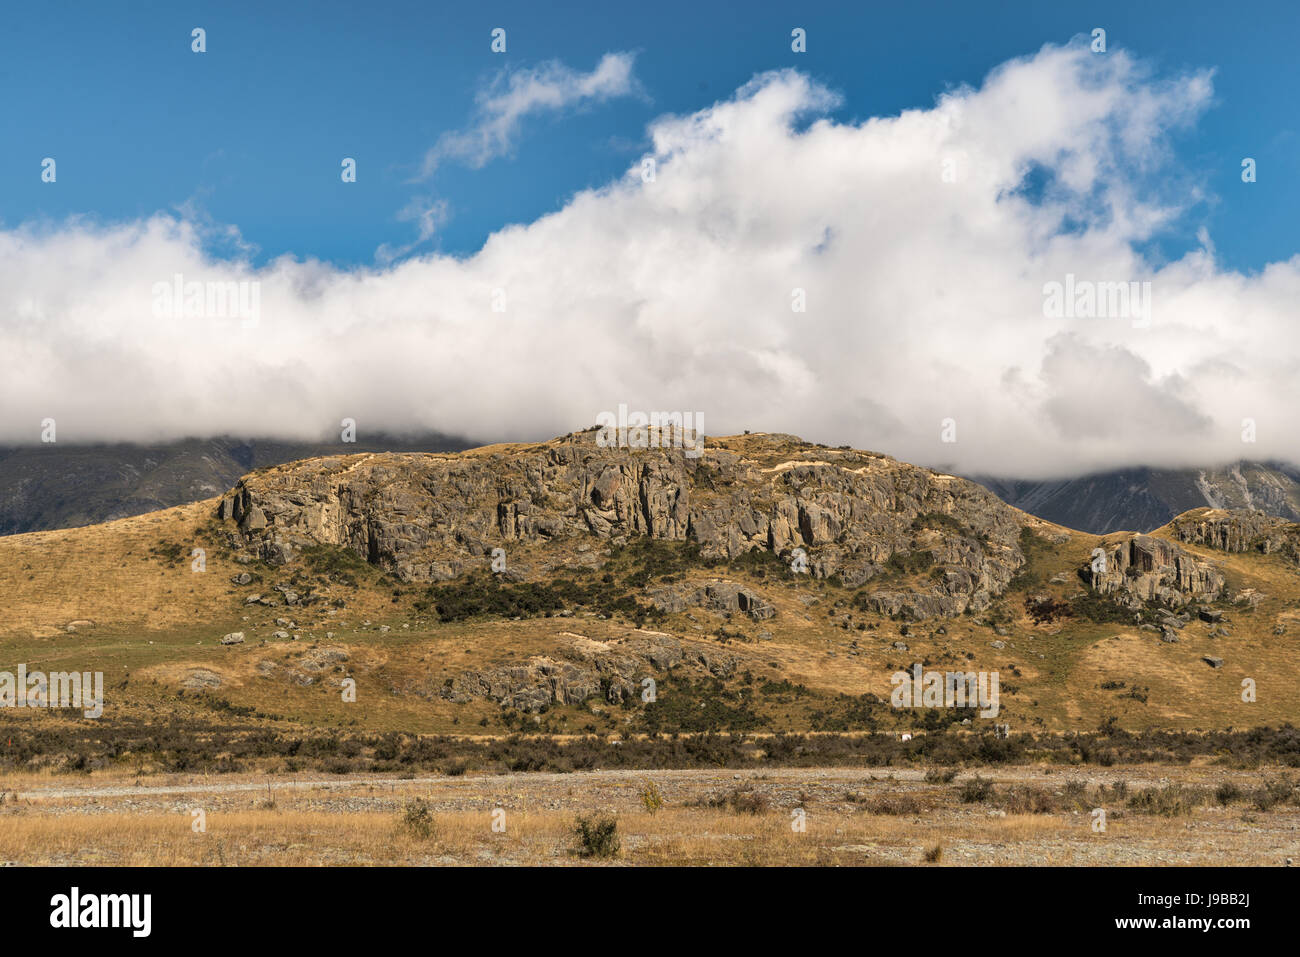 Middle Earth, New Zealand - March 14, 2017: Focus on the Rock of Middle Earth set in a high desert mountainous scenery under blue cloudy sky. Stock Photo